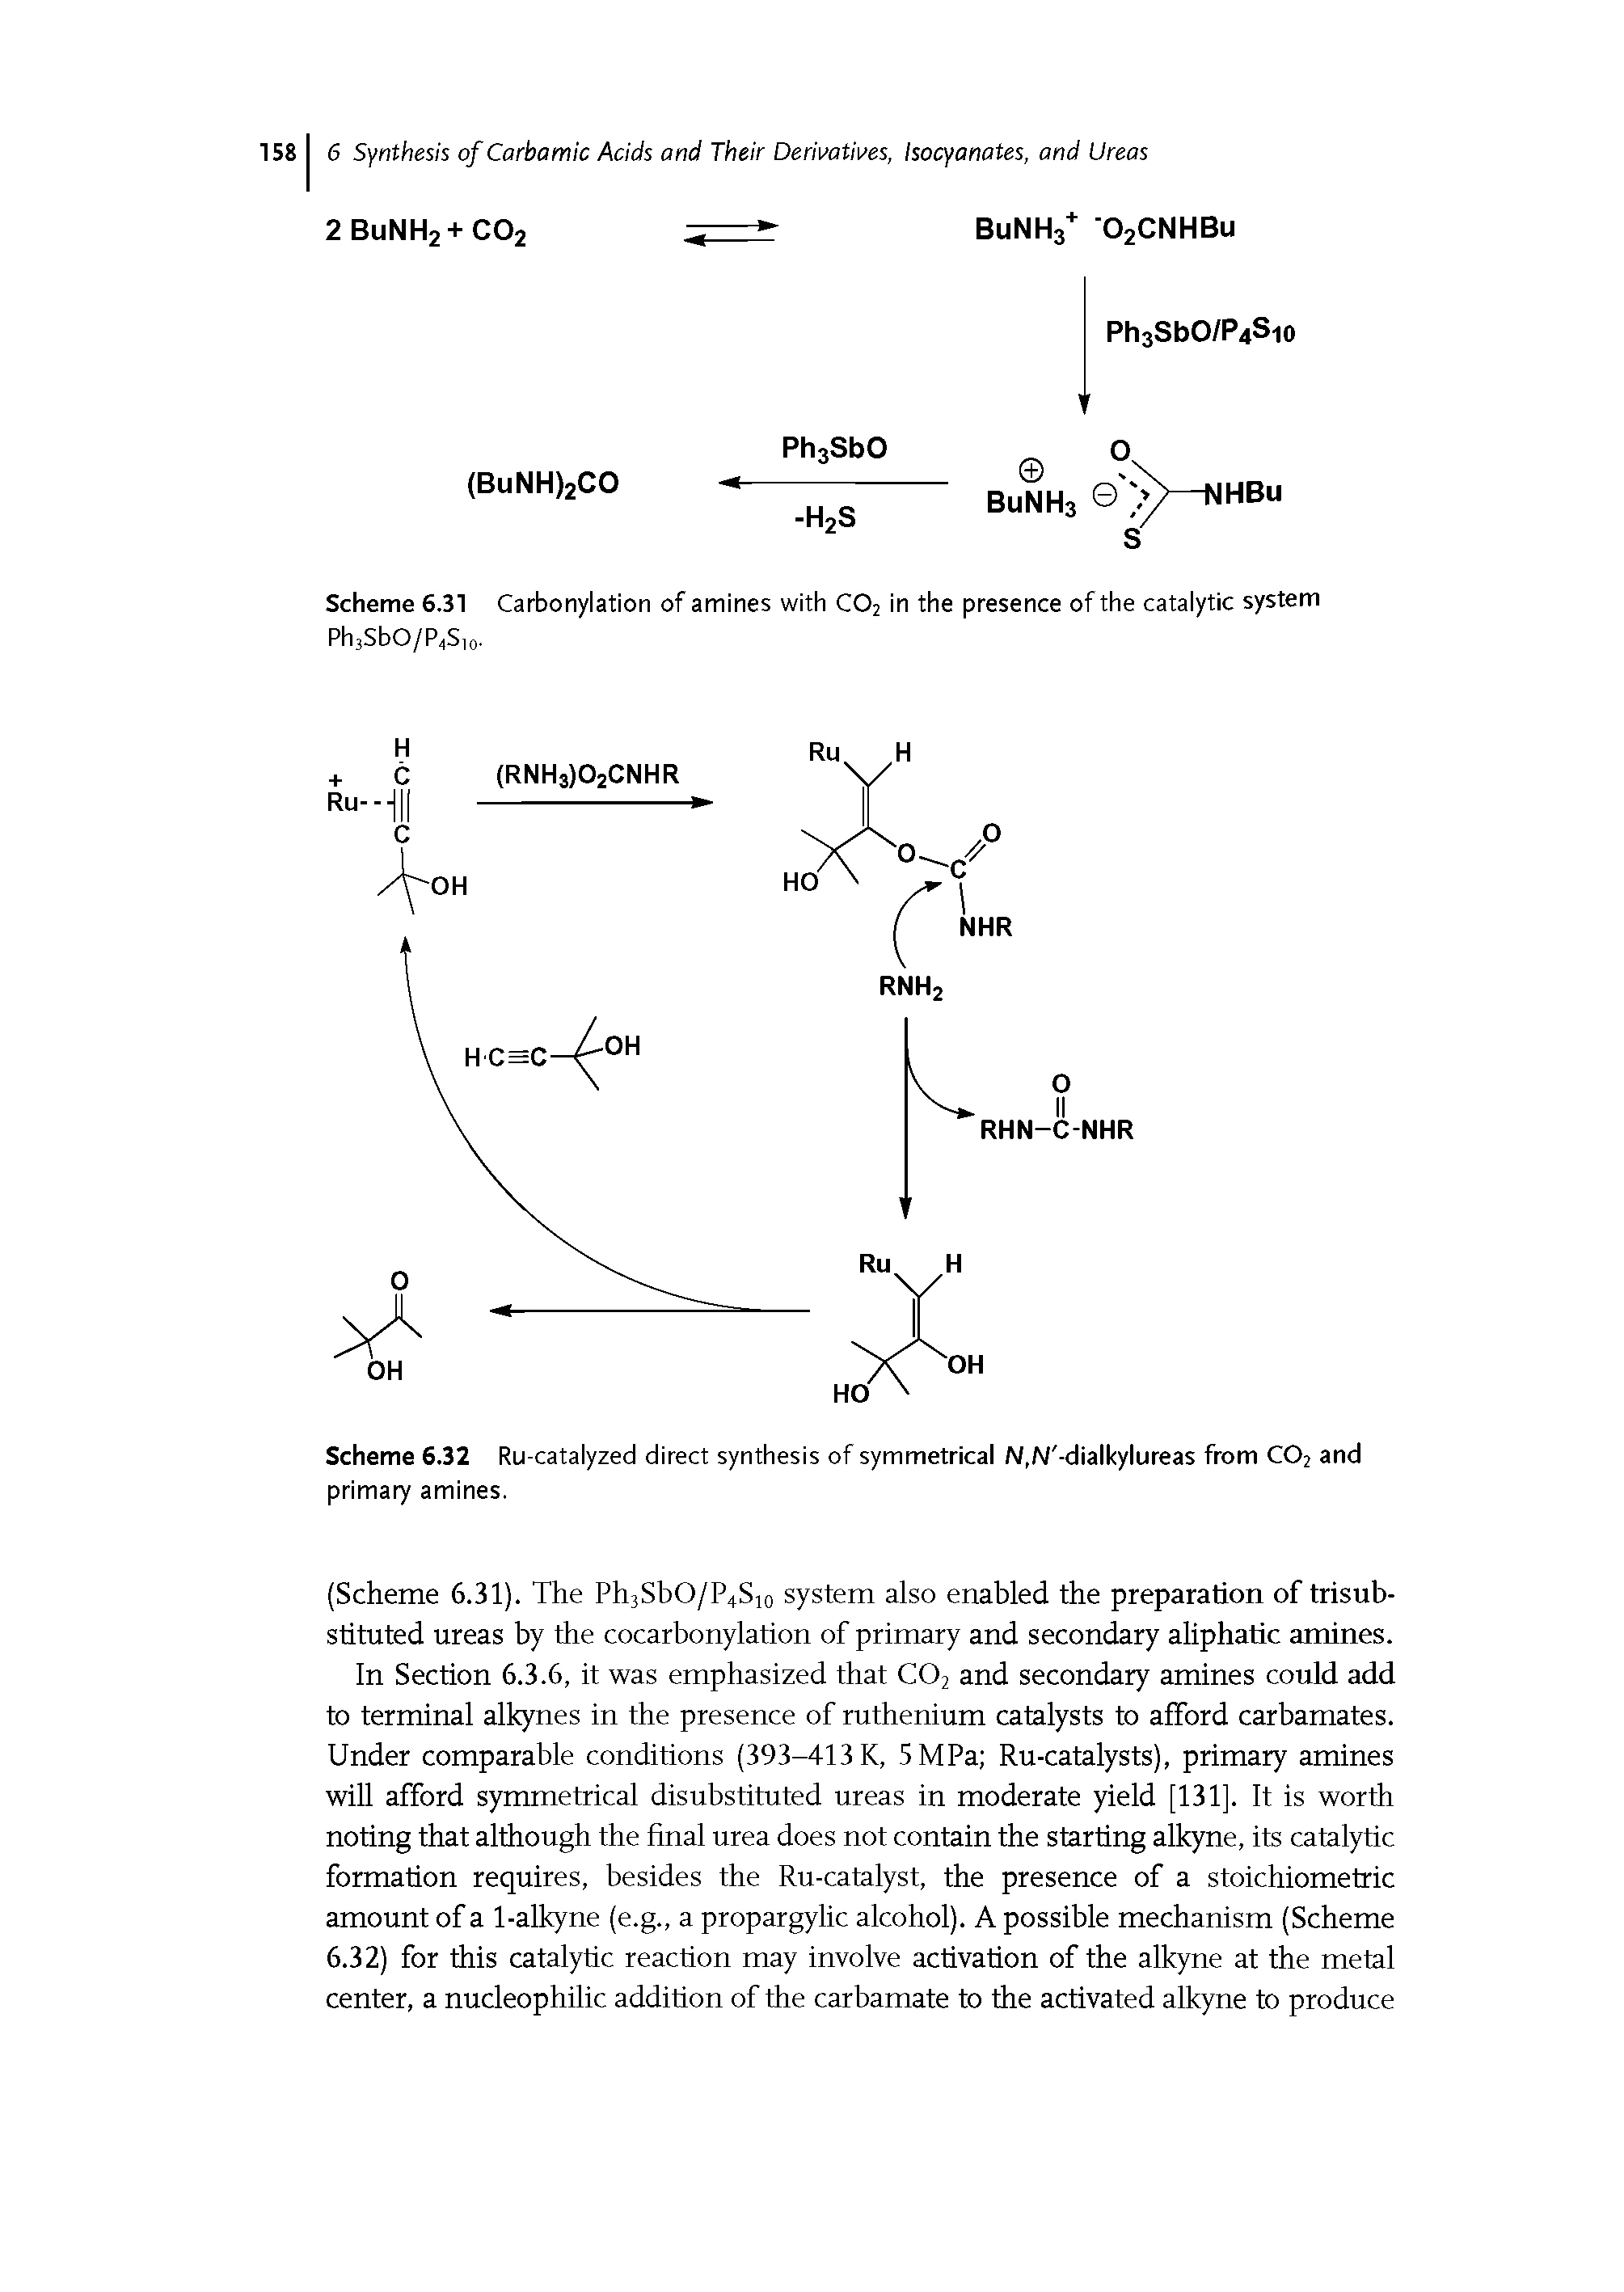 Scheme 6.31 Carbonylation of amines with C02 in the presence of the catalytic system Ph3SbO/P4S10.